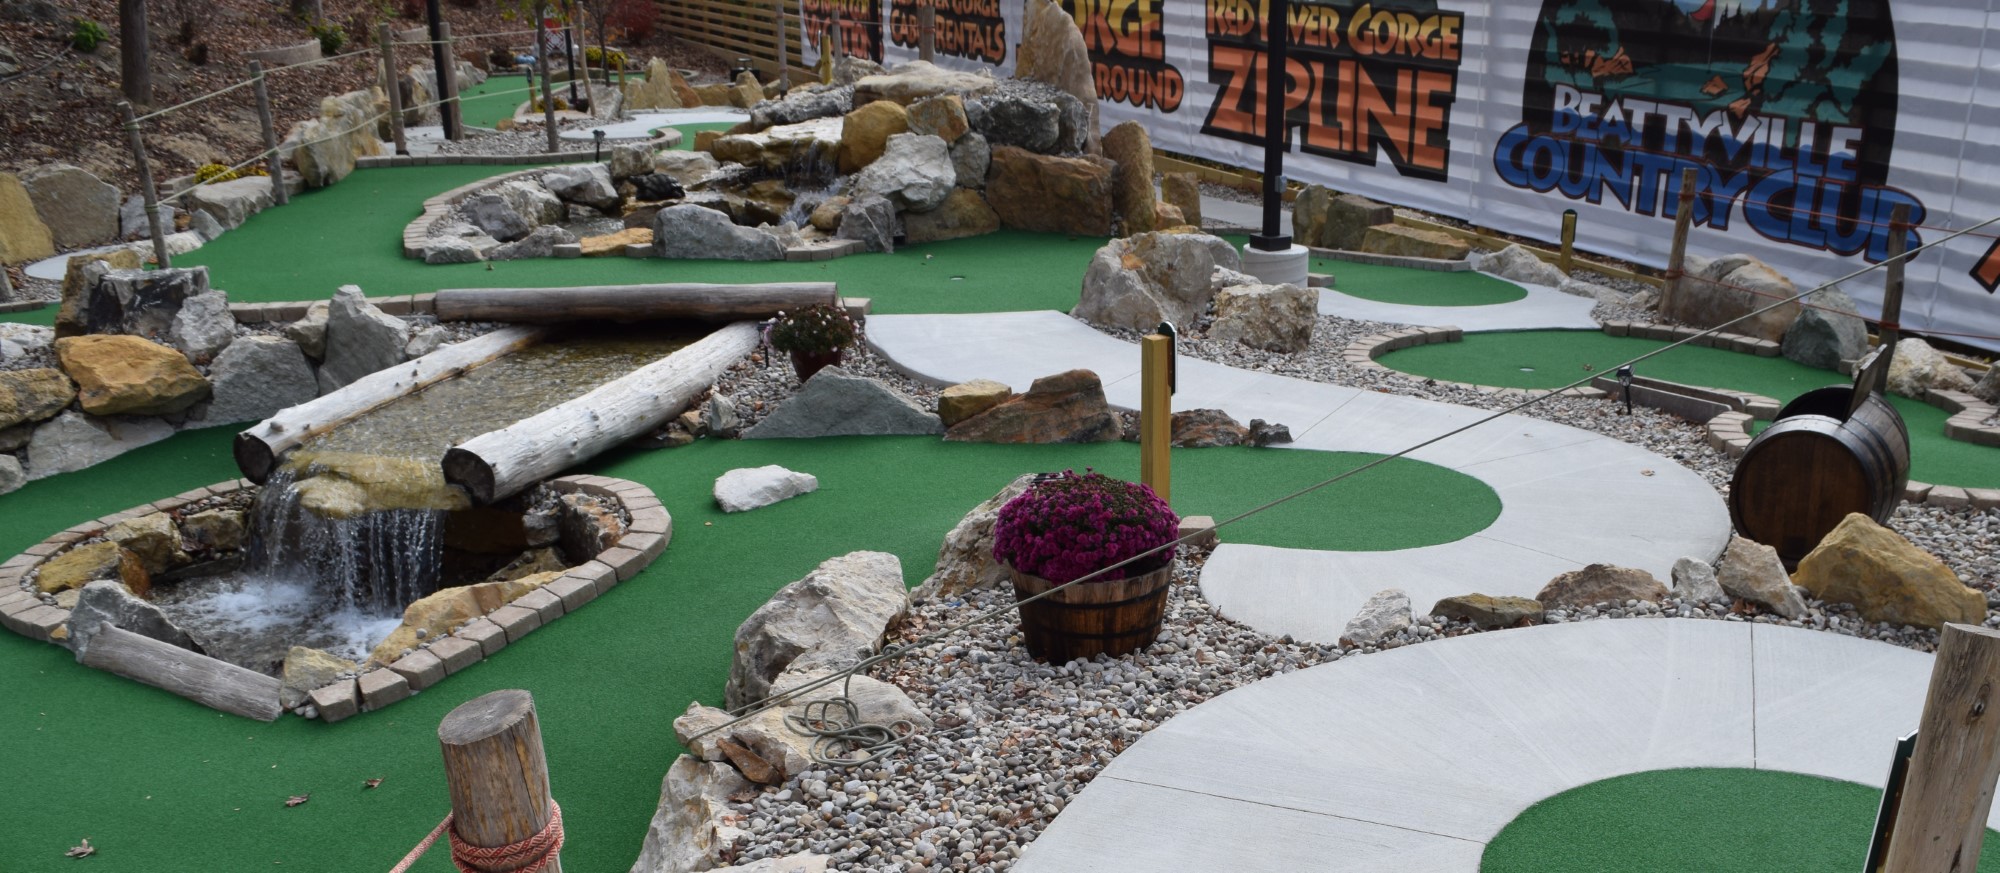 Massive stones, a pond, waterfalls and hole elevations make Thrillsville mini golf challenging